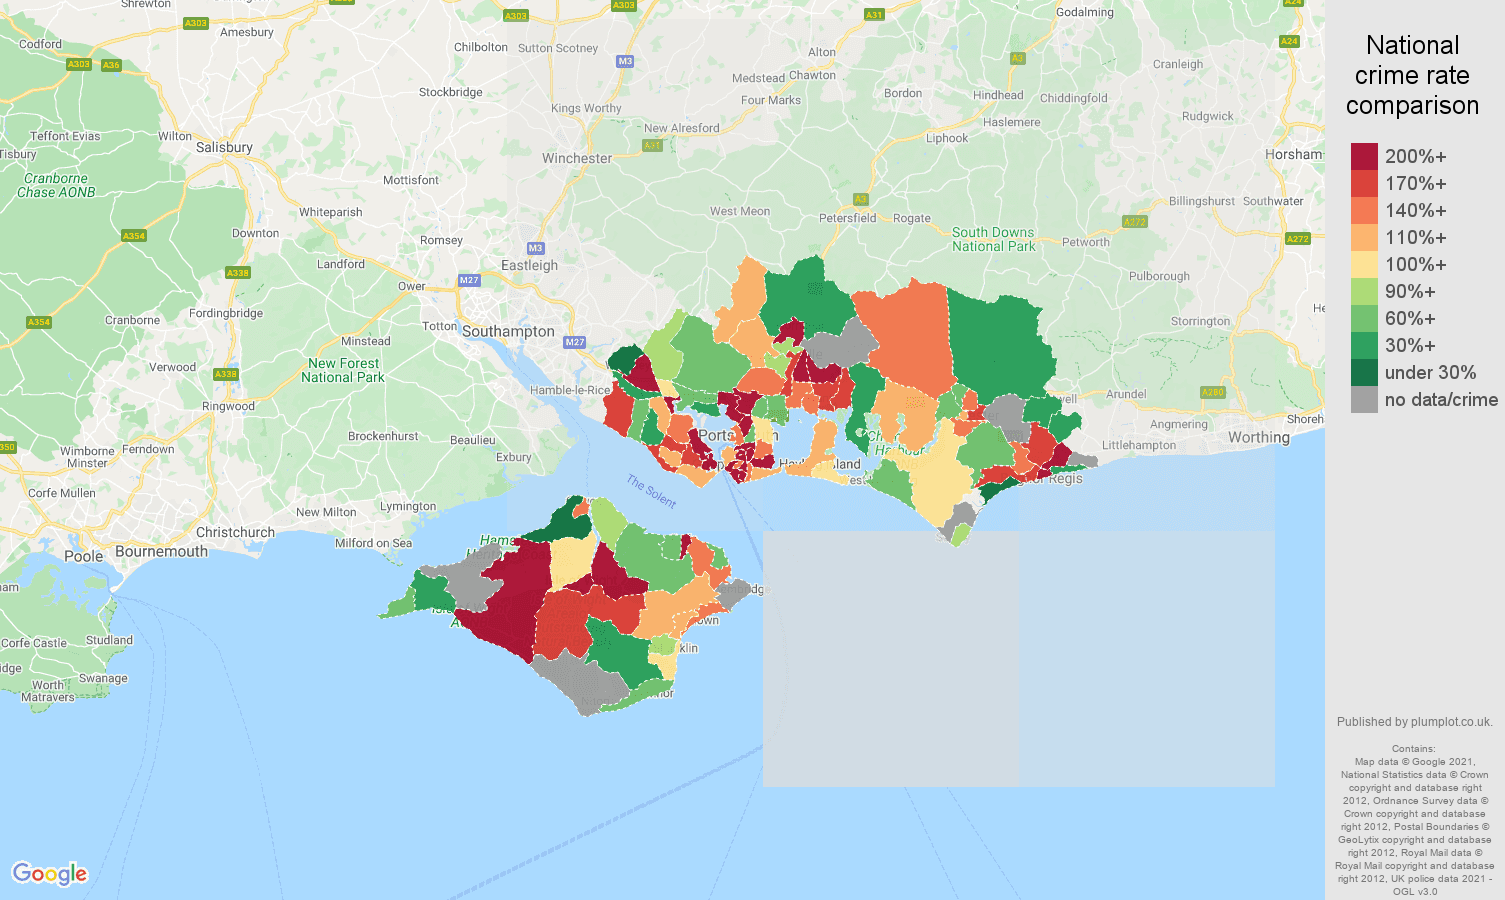 Portsmouth possession of weapons crime rate comparison map